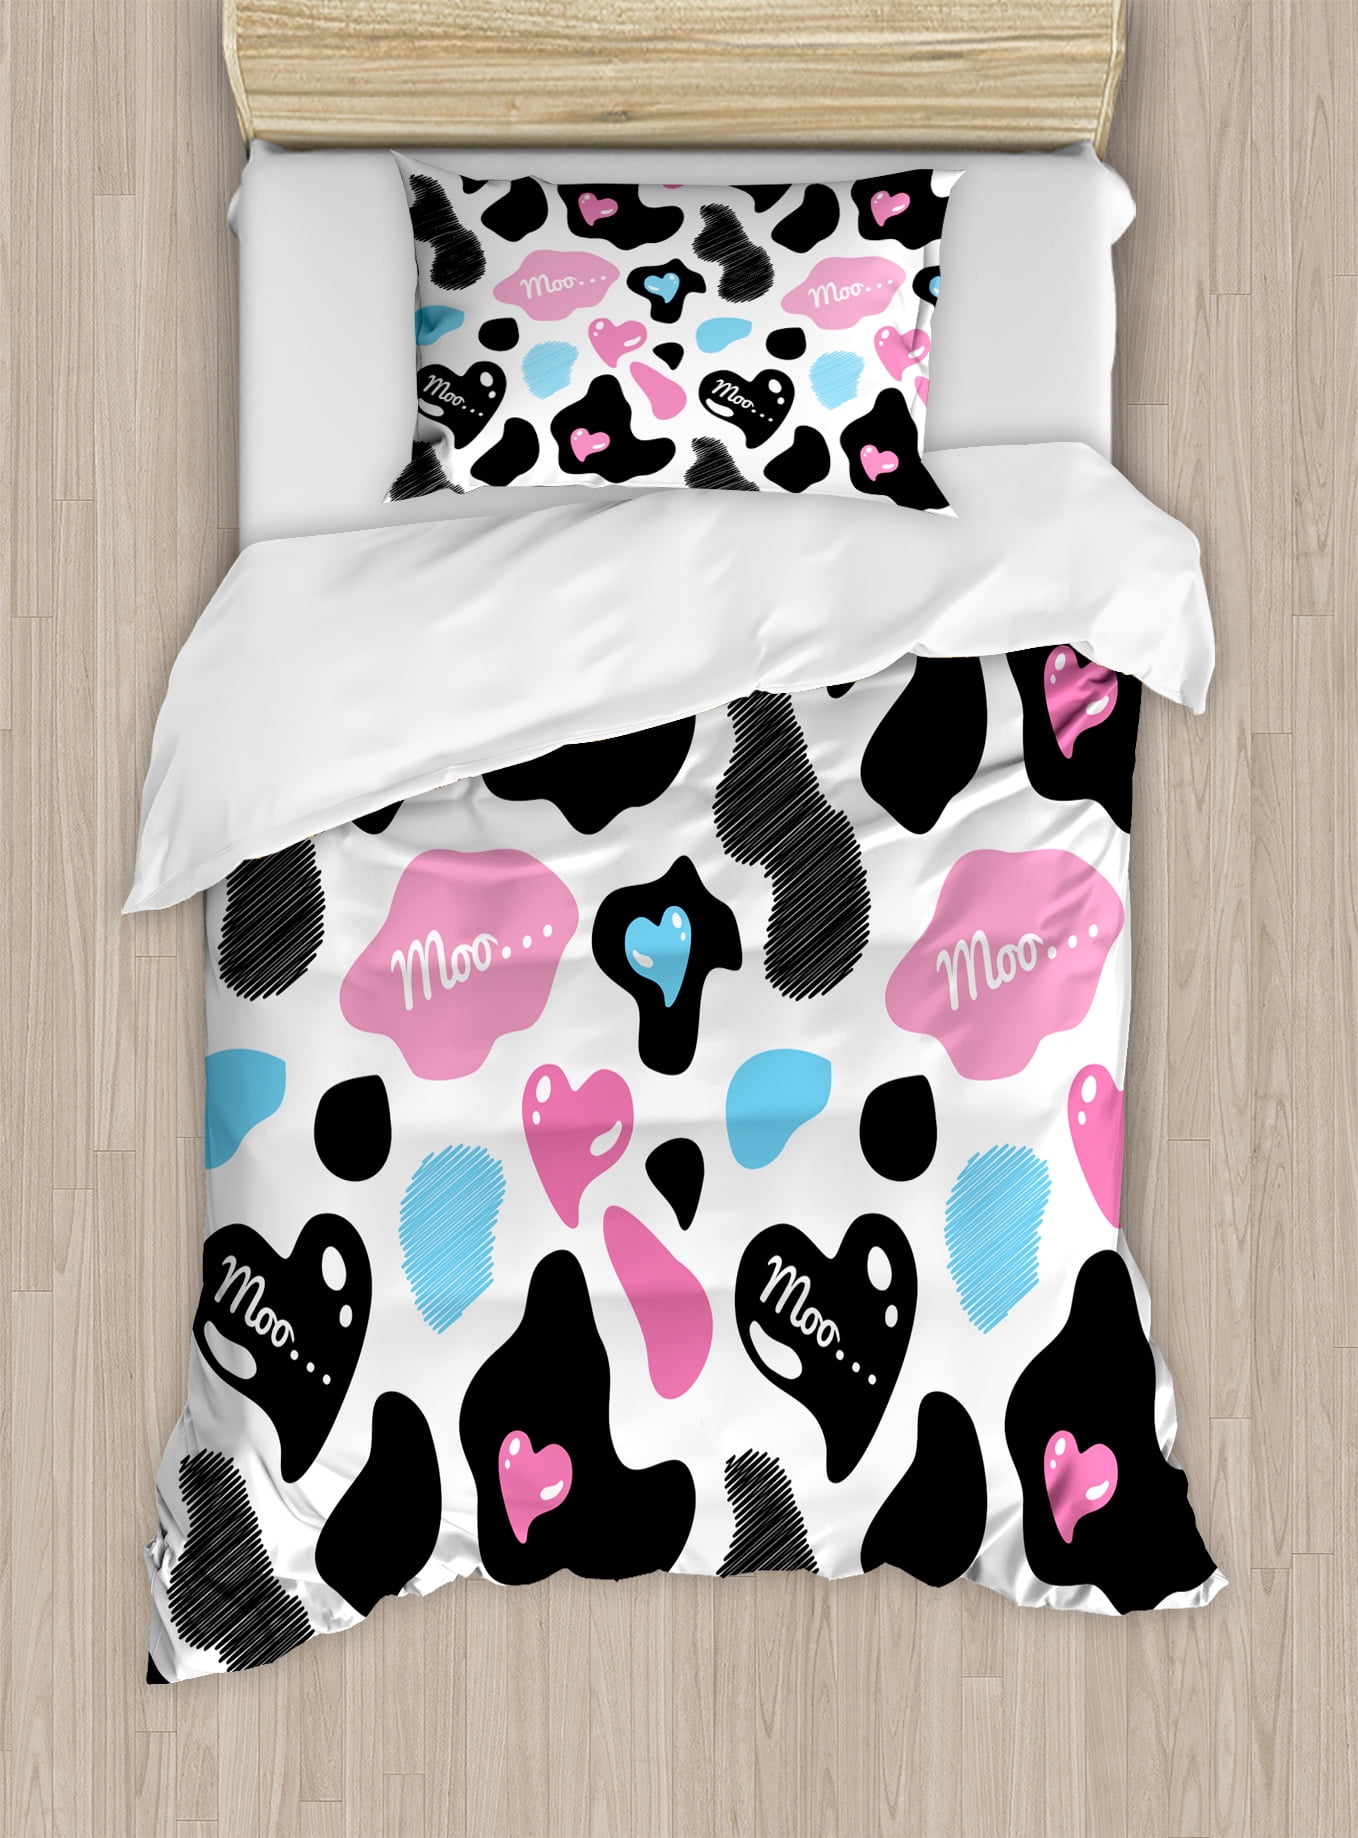 Cow Print Duvet Cover Set Lovely Cow Hide With Cute Hearts Moo